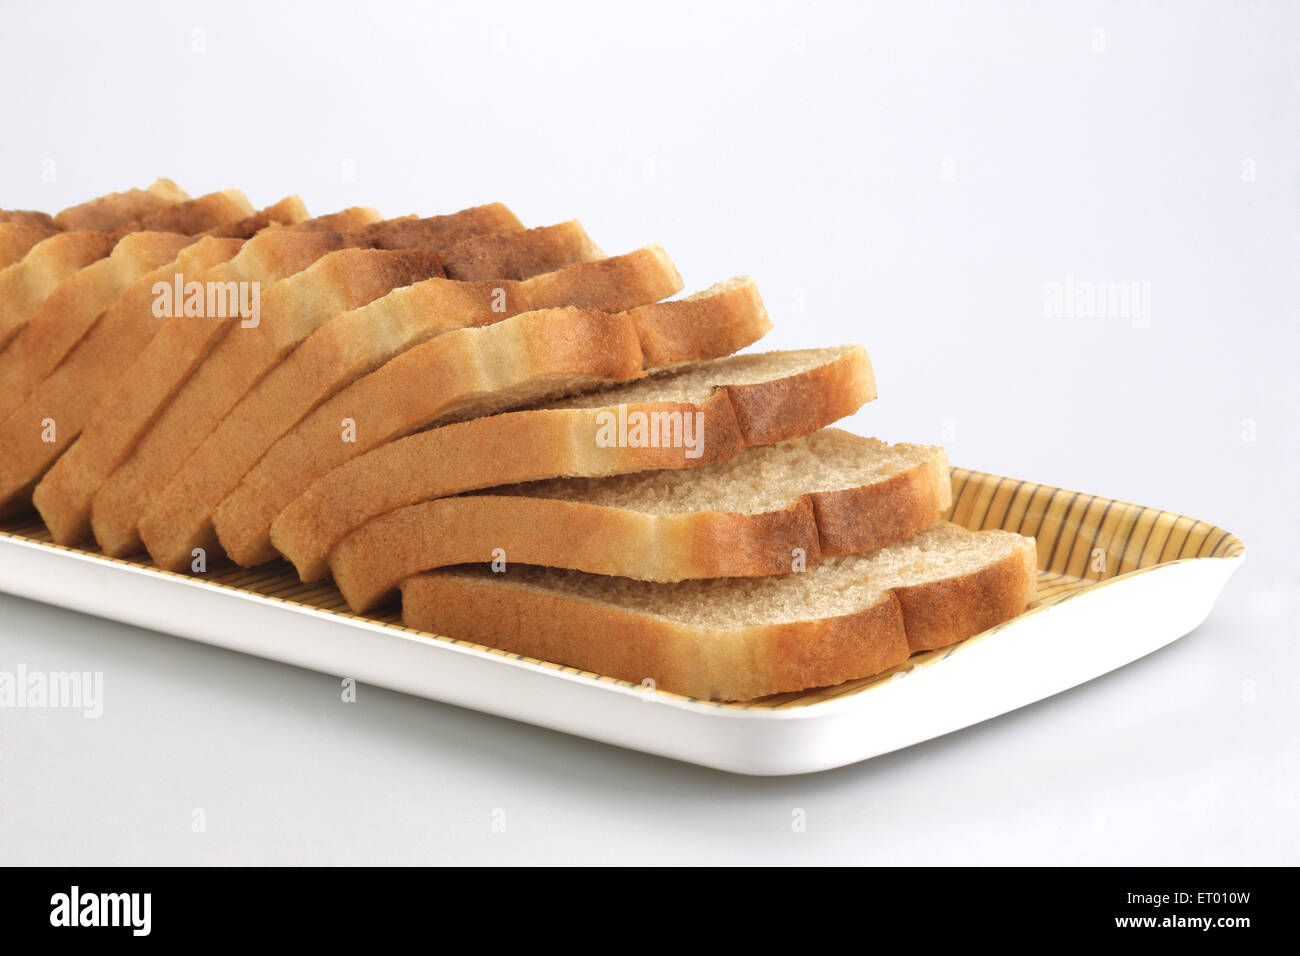 Sliced brown bread on white background Stock Photo